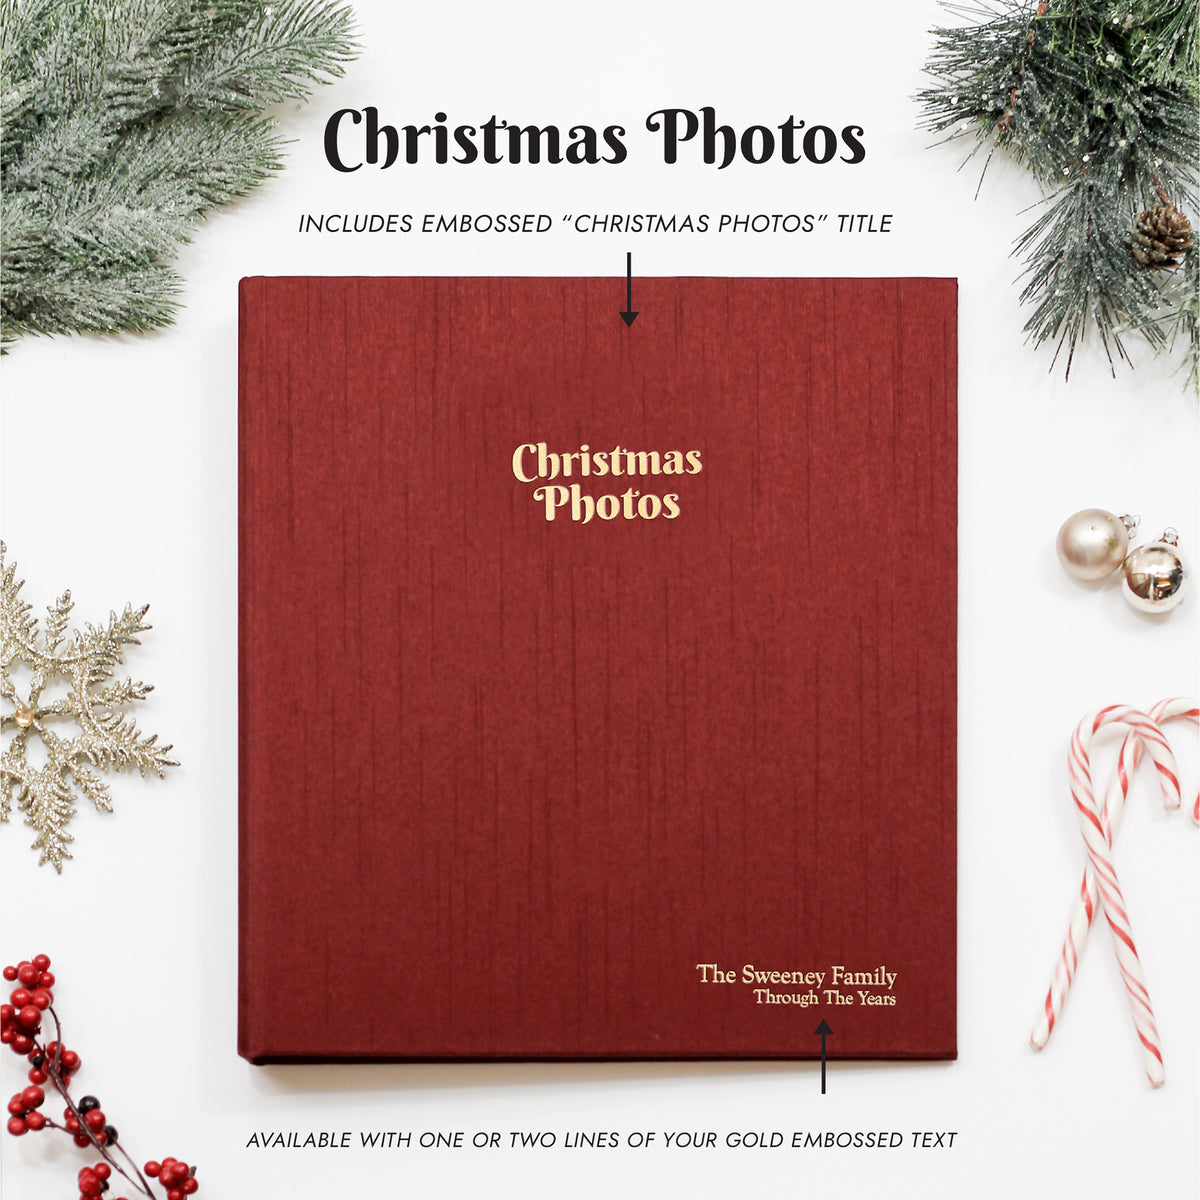 Large Christmas Photo Binder with Misty Blue Silk Cover for 4x6 or 5x7 Photos